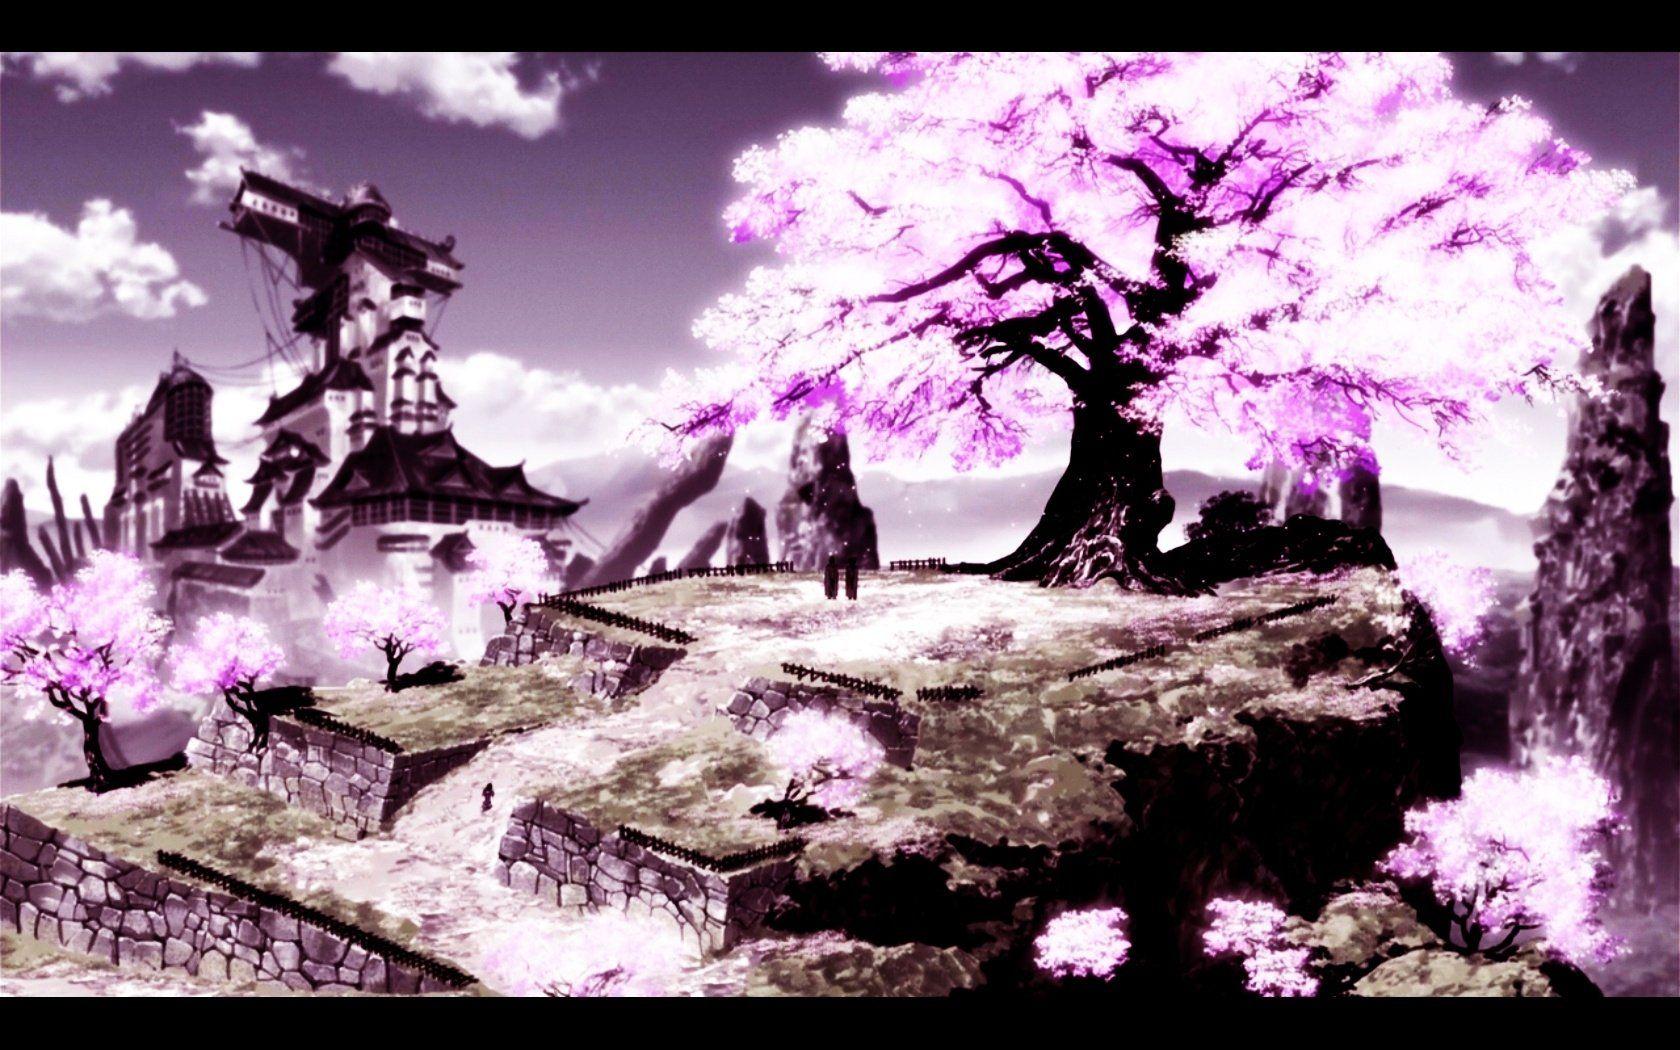 Afro Samurai HD Wallpaper and Background Image